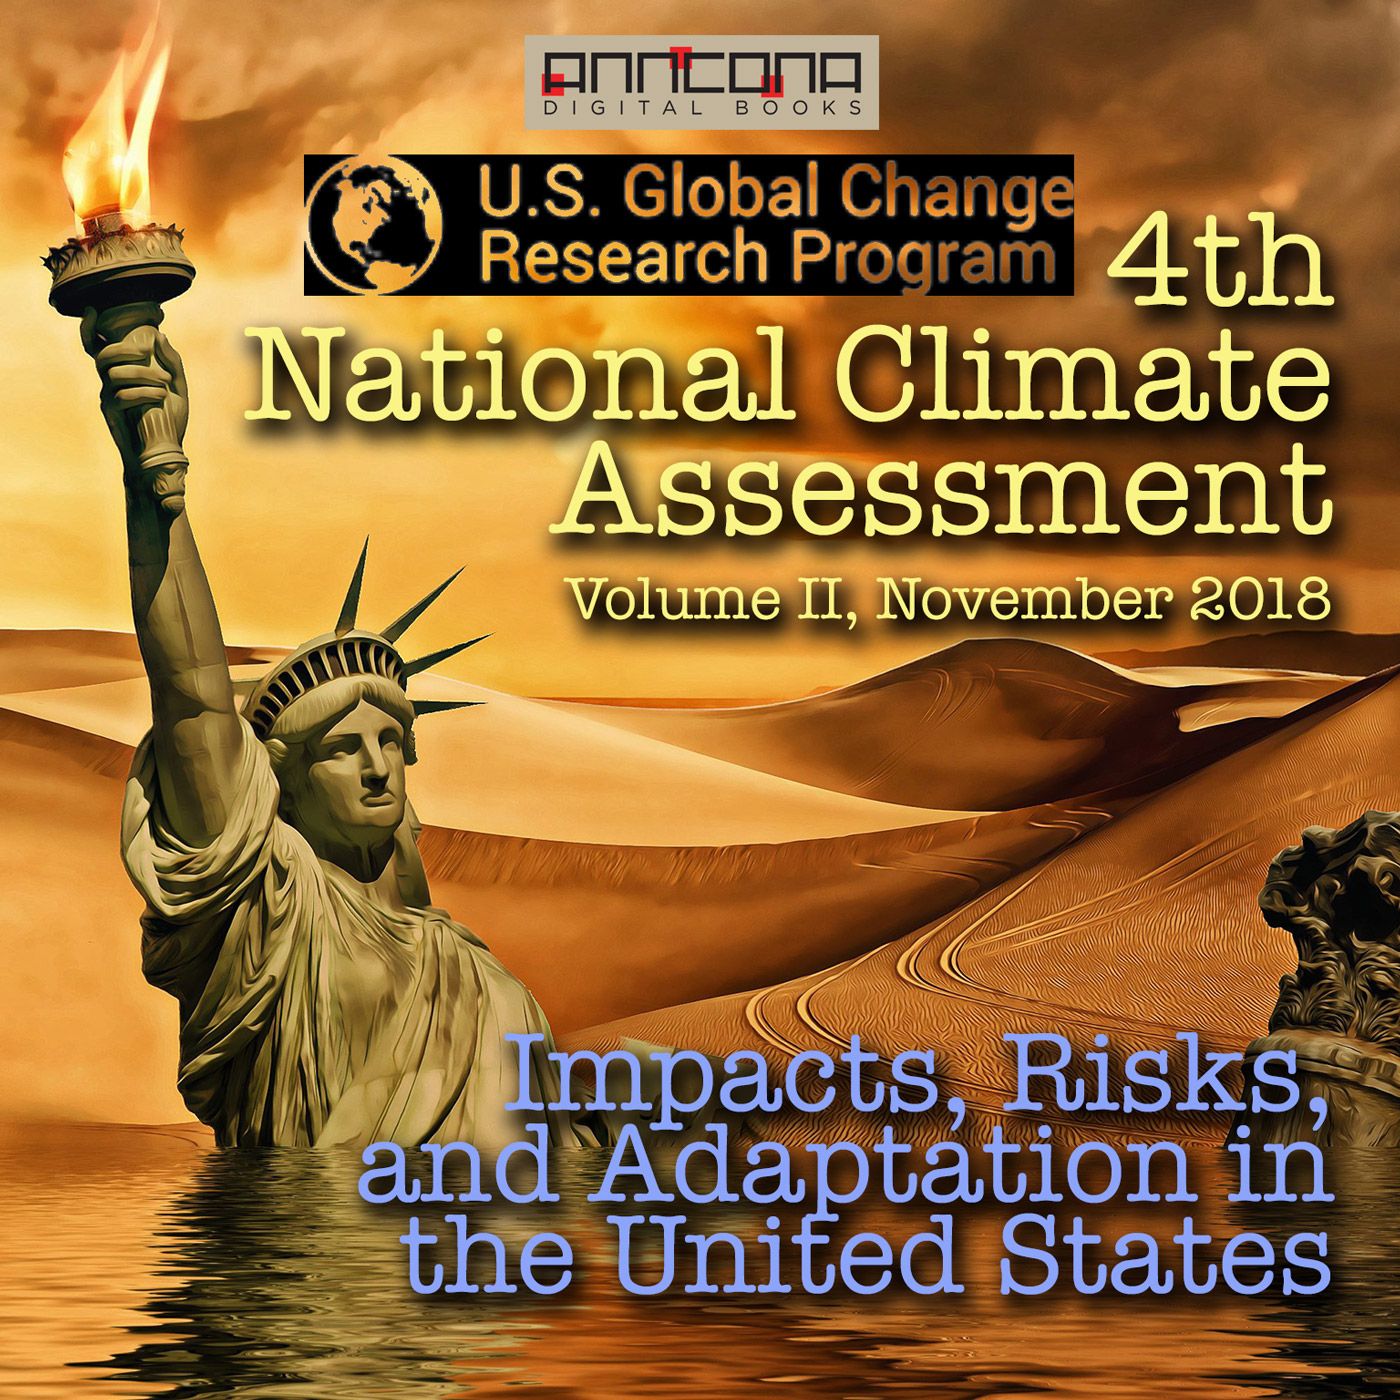 4th National Climate Assessment, Volume II, audiobook by U.S. Global Change Research Program